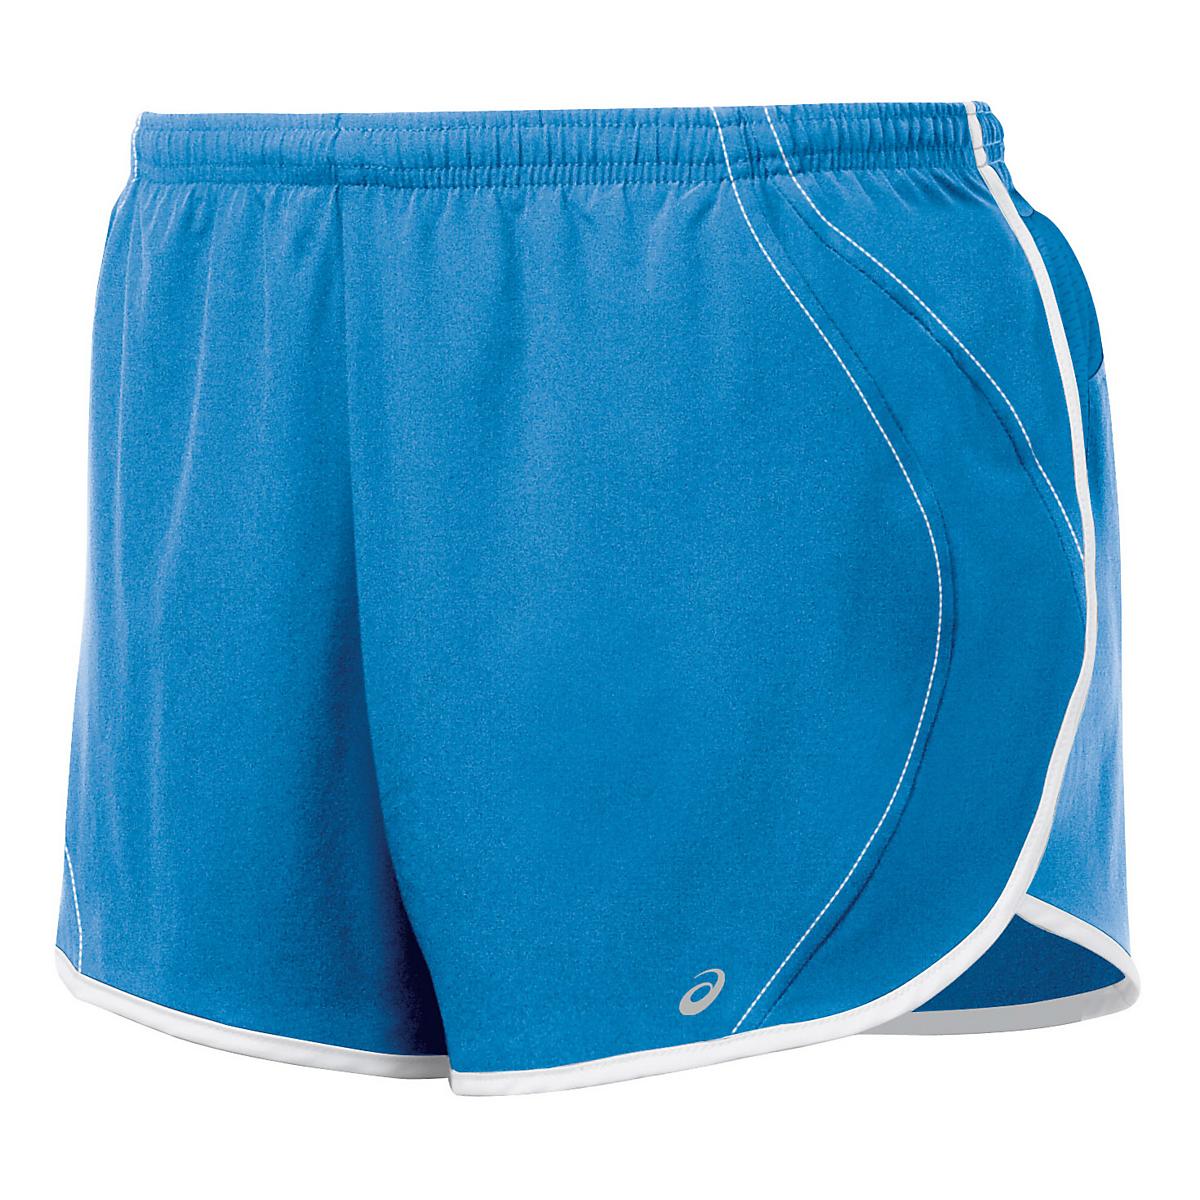 Womens ASICS Quad Lined Shorts at Road Runner Sports